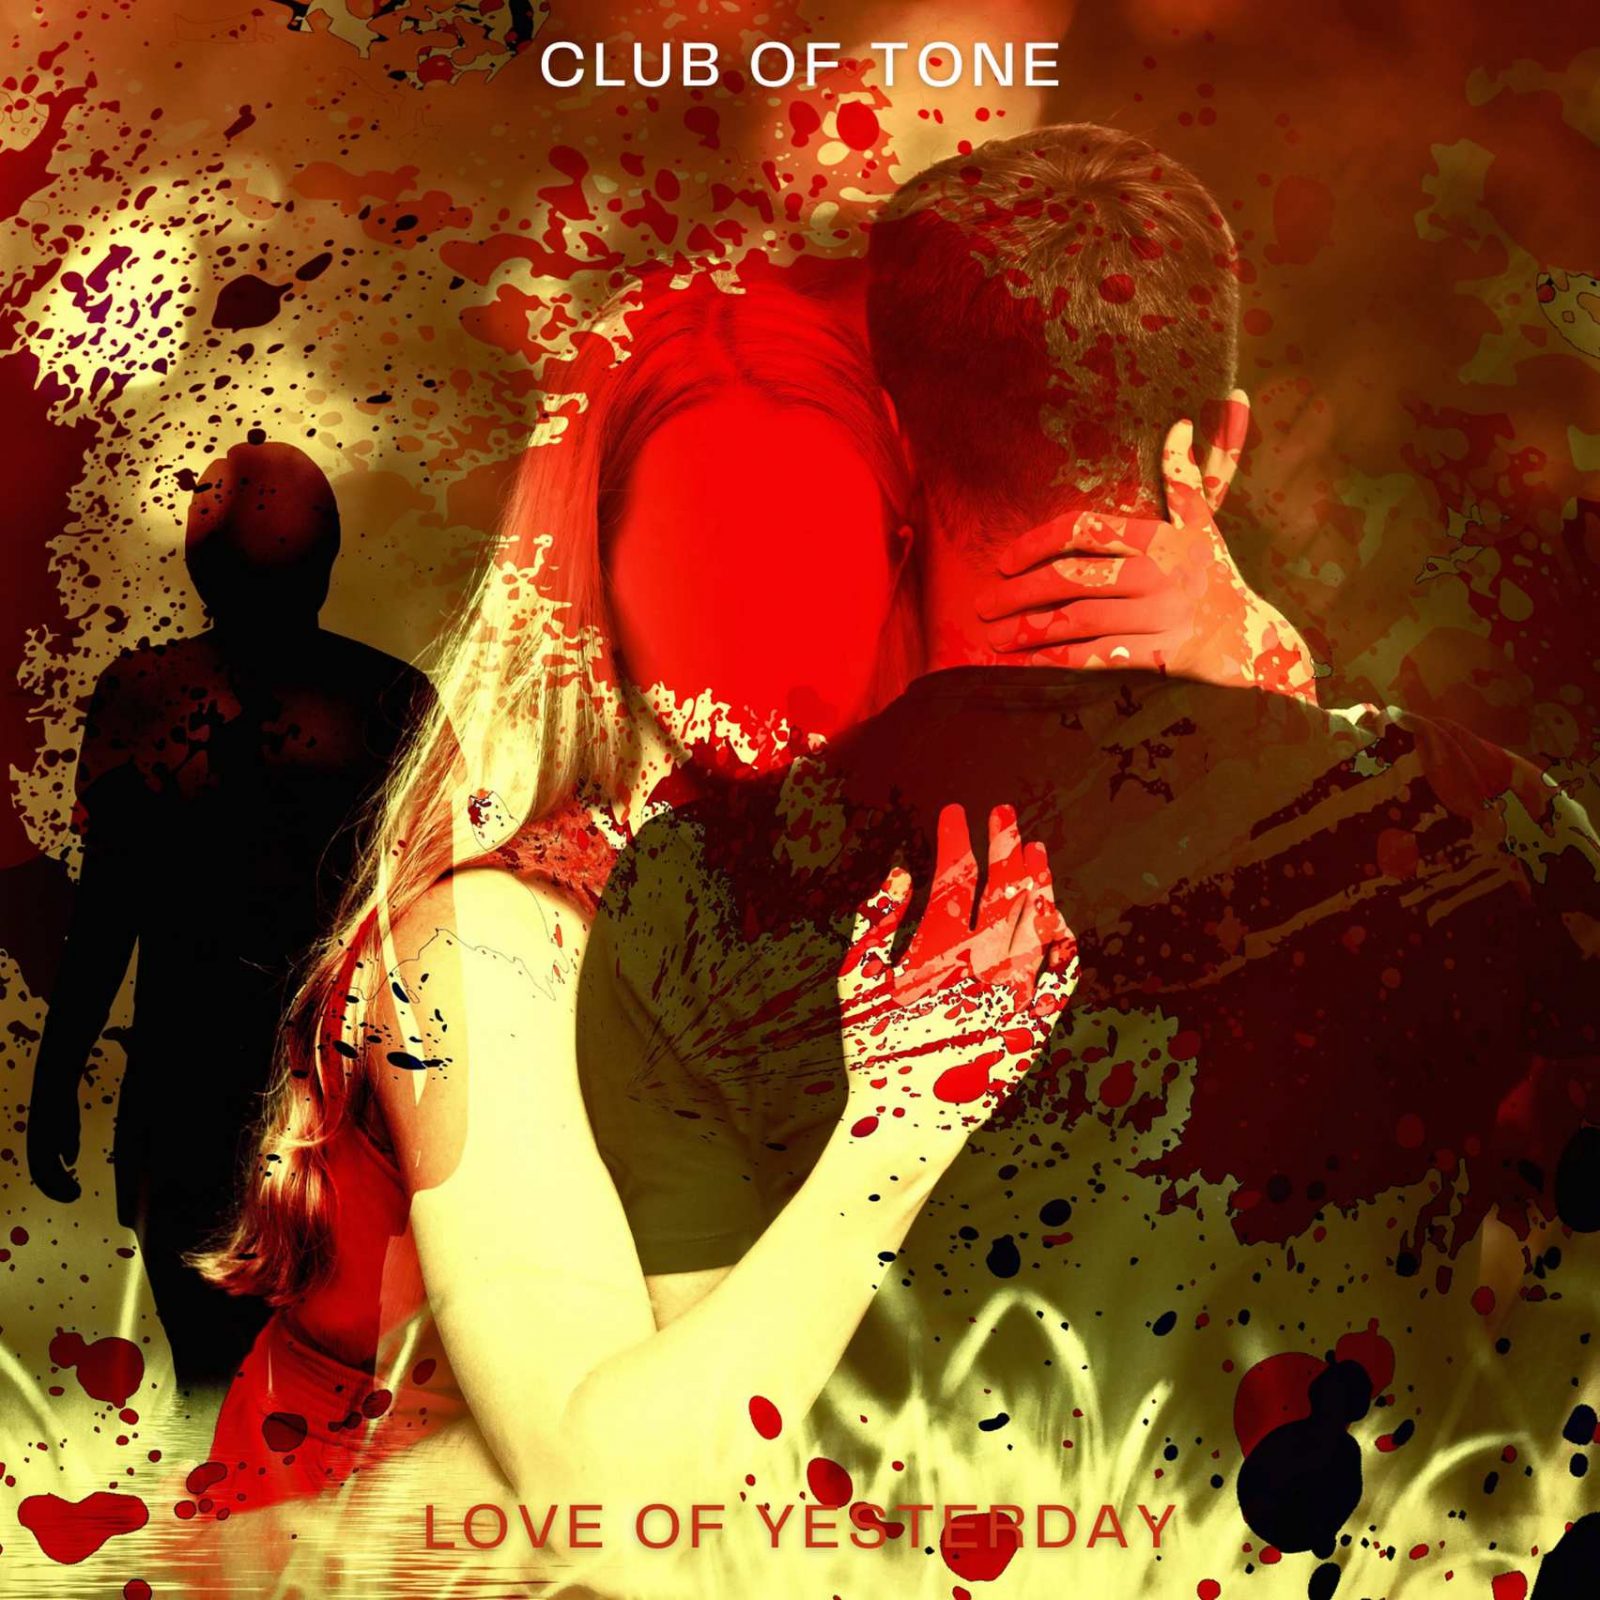 LOVE OF YESTERDAY by Club of Tone